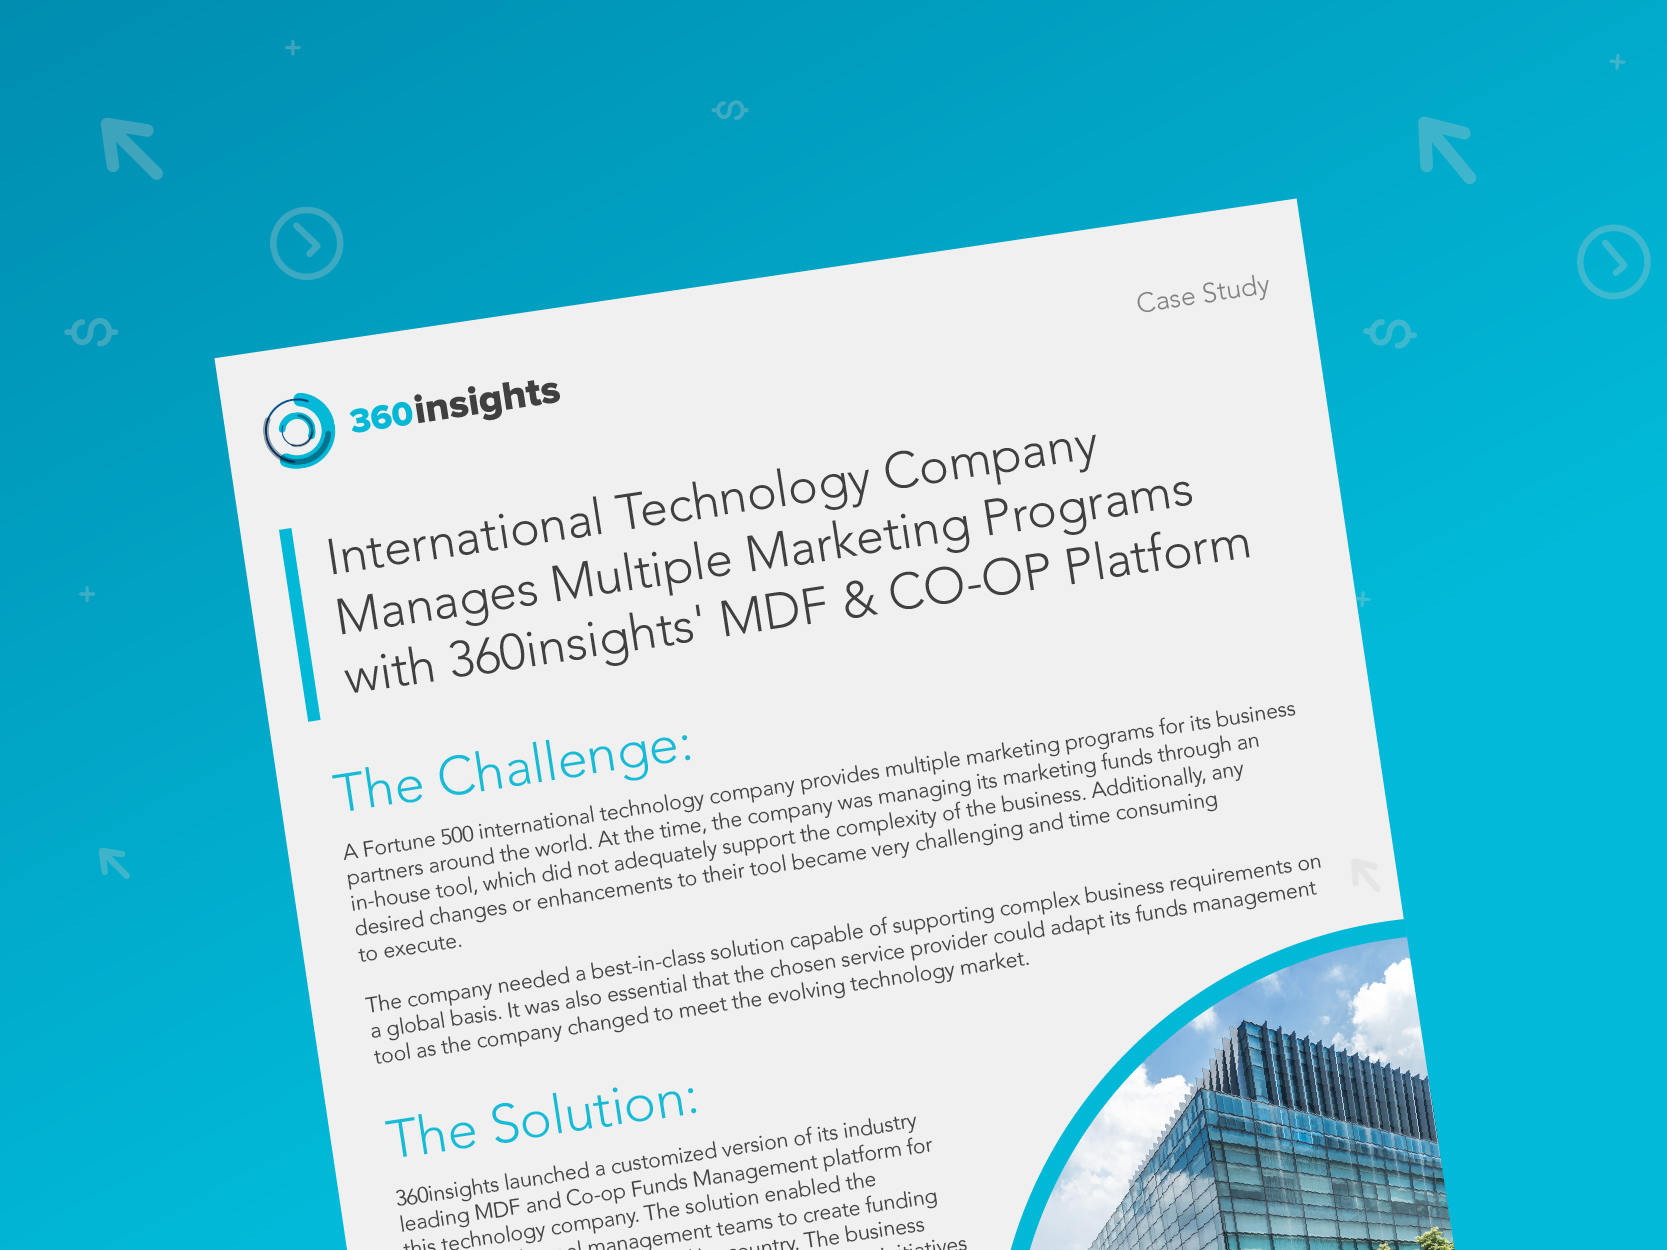 Case study about MDF & CO-OP Solutions that can be used for success